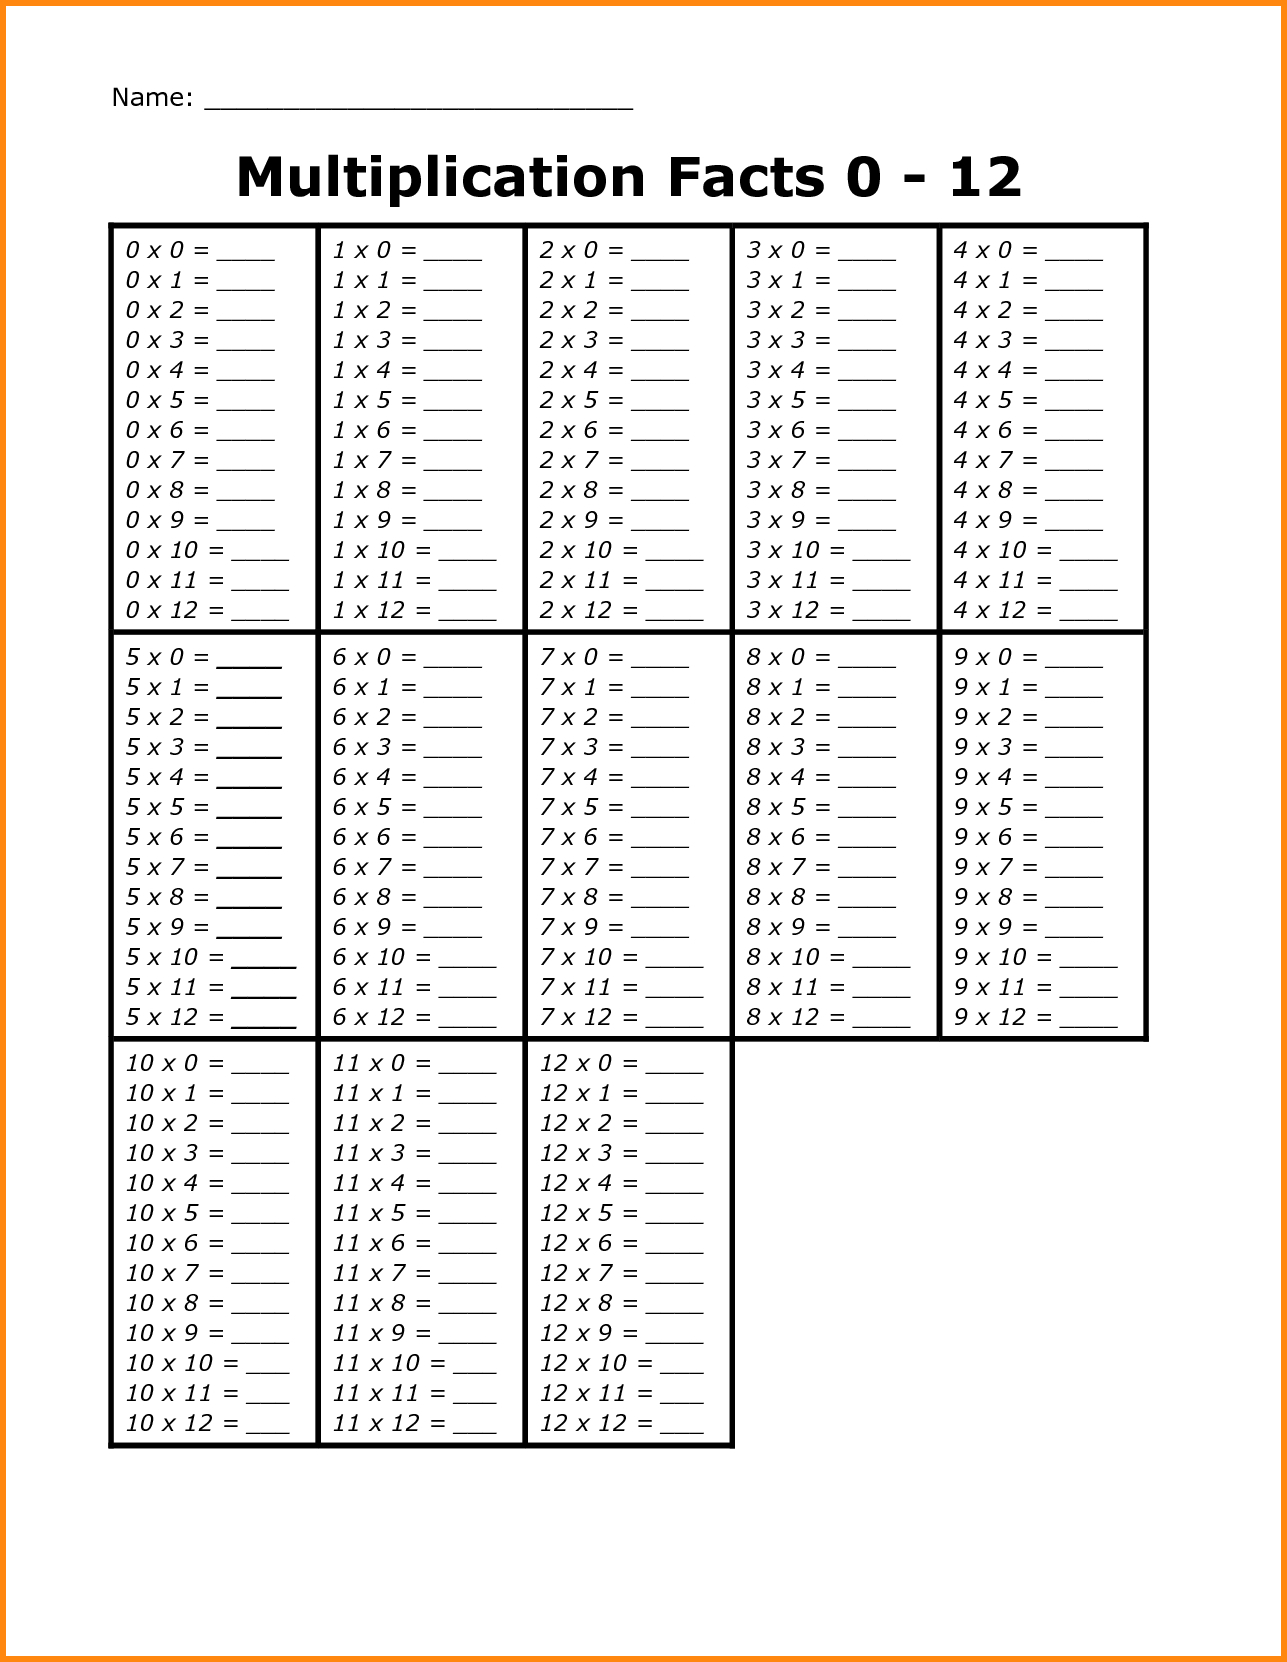 Time Table Worksheet Print Out | Printable Worksheets And intended for Printable Multiplication List 1-12